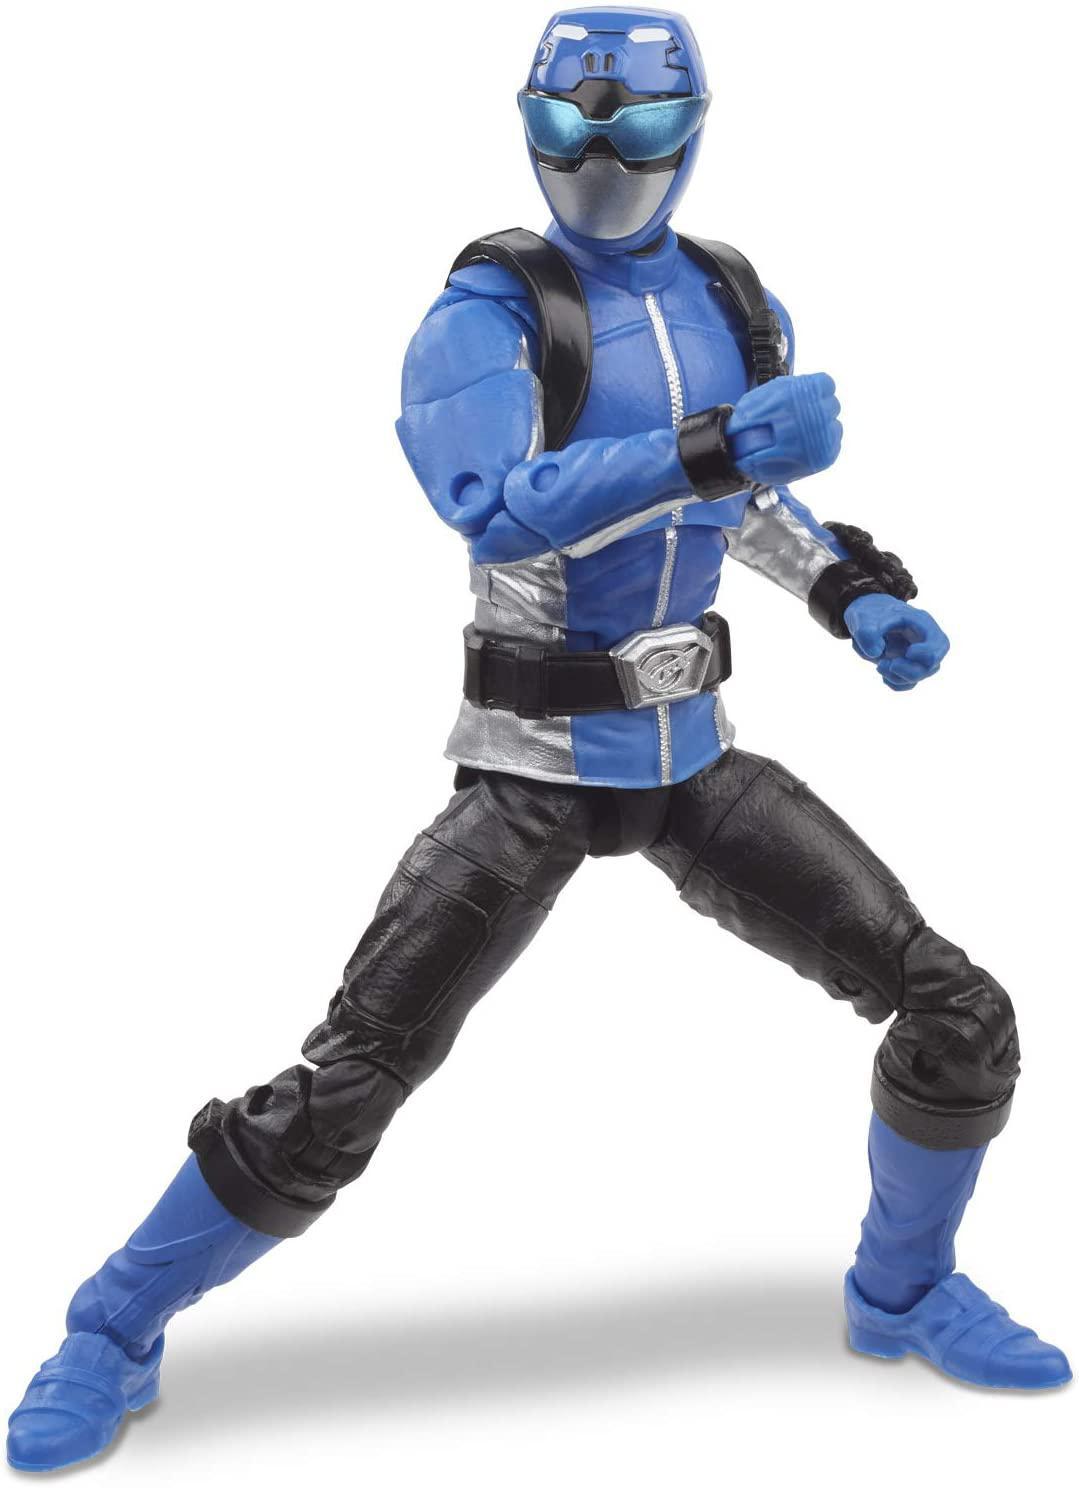 Power Rangers Lightning Collection 6 inch Beast Morphers Blue Ranger Collectible Action Figure Toy with Accessories